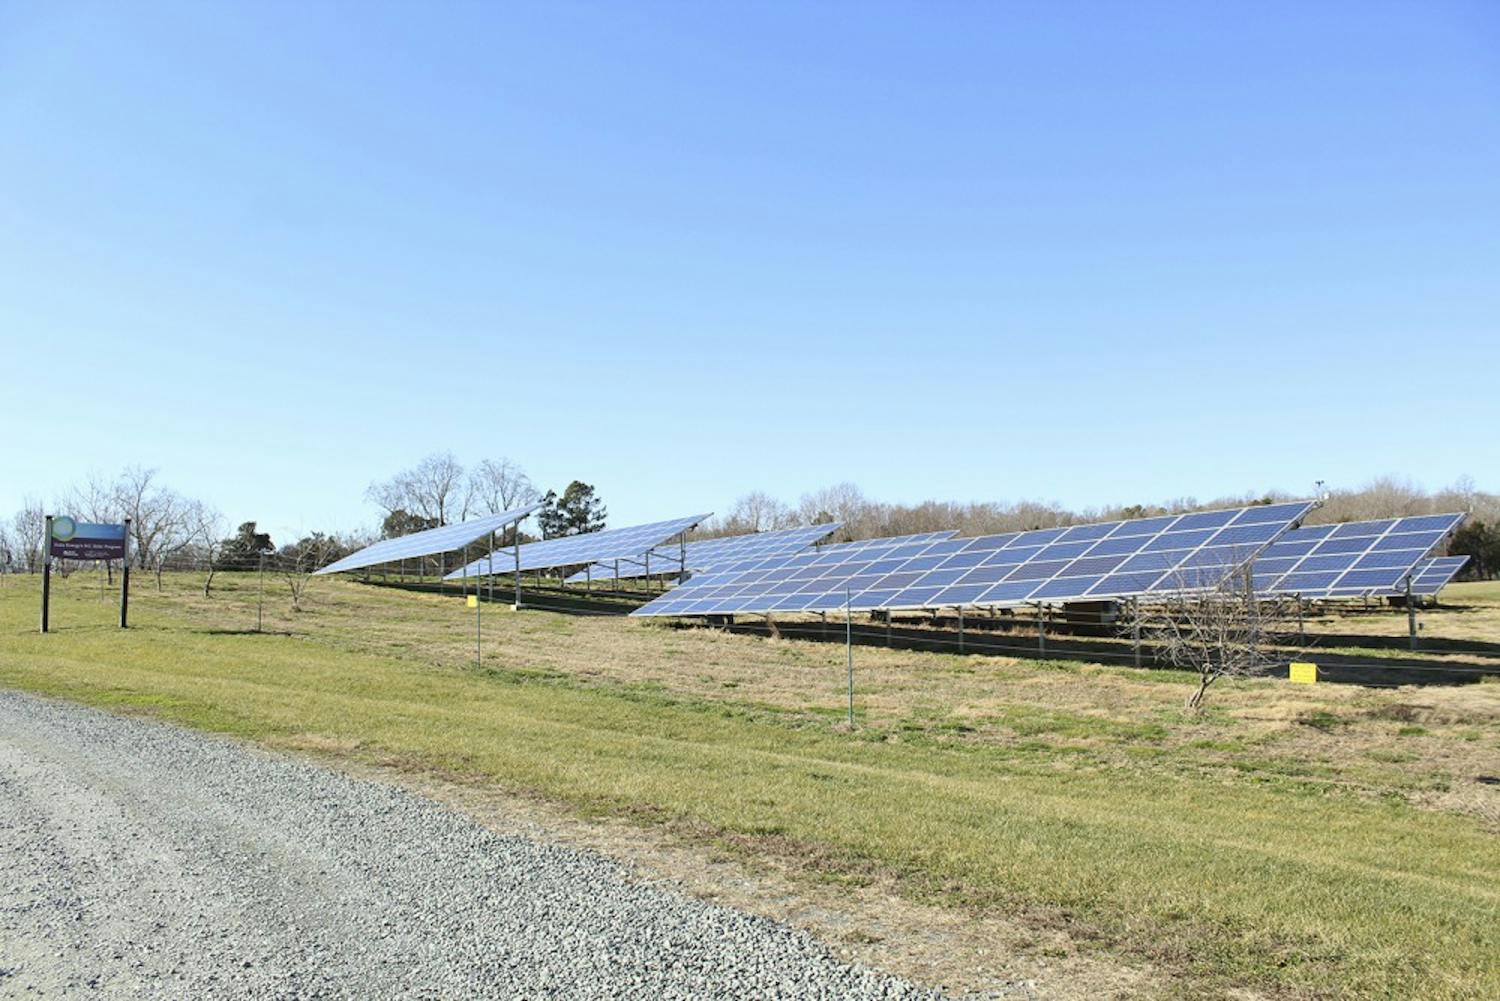 Currituck County, on the northeastern coast of North Carolina, is considering banning solar farms because of loss of agricultural land.&nbsp;